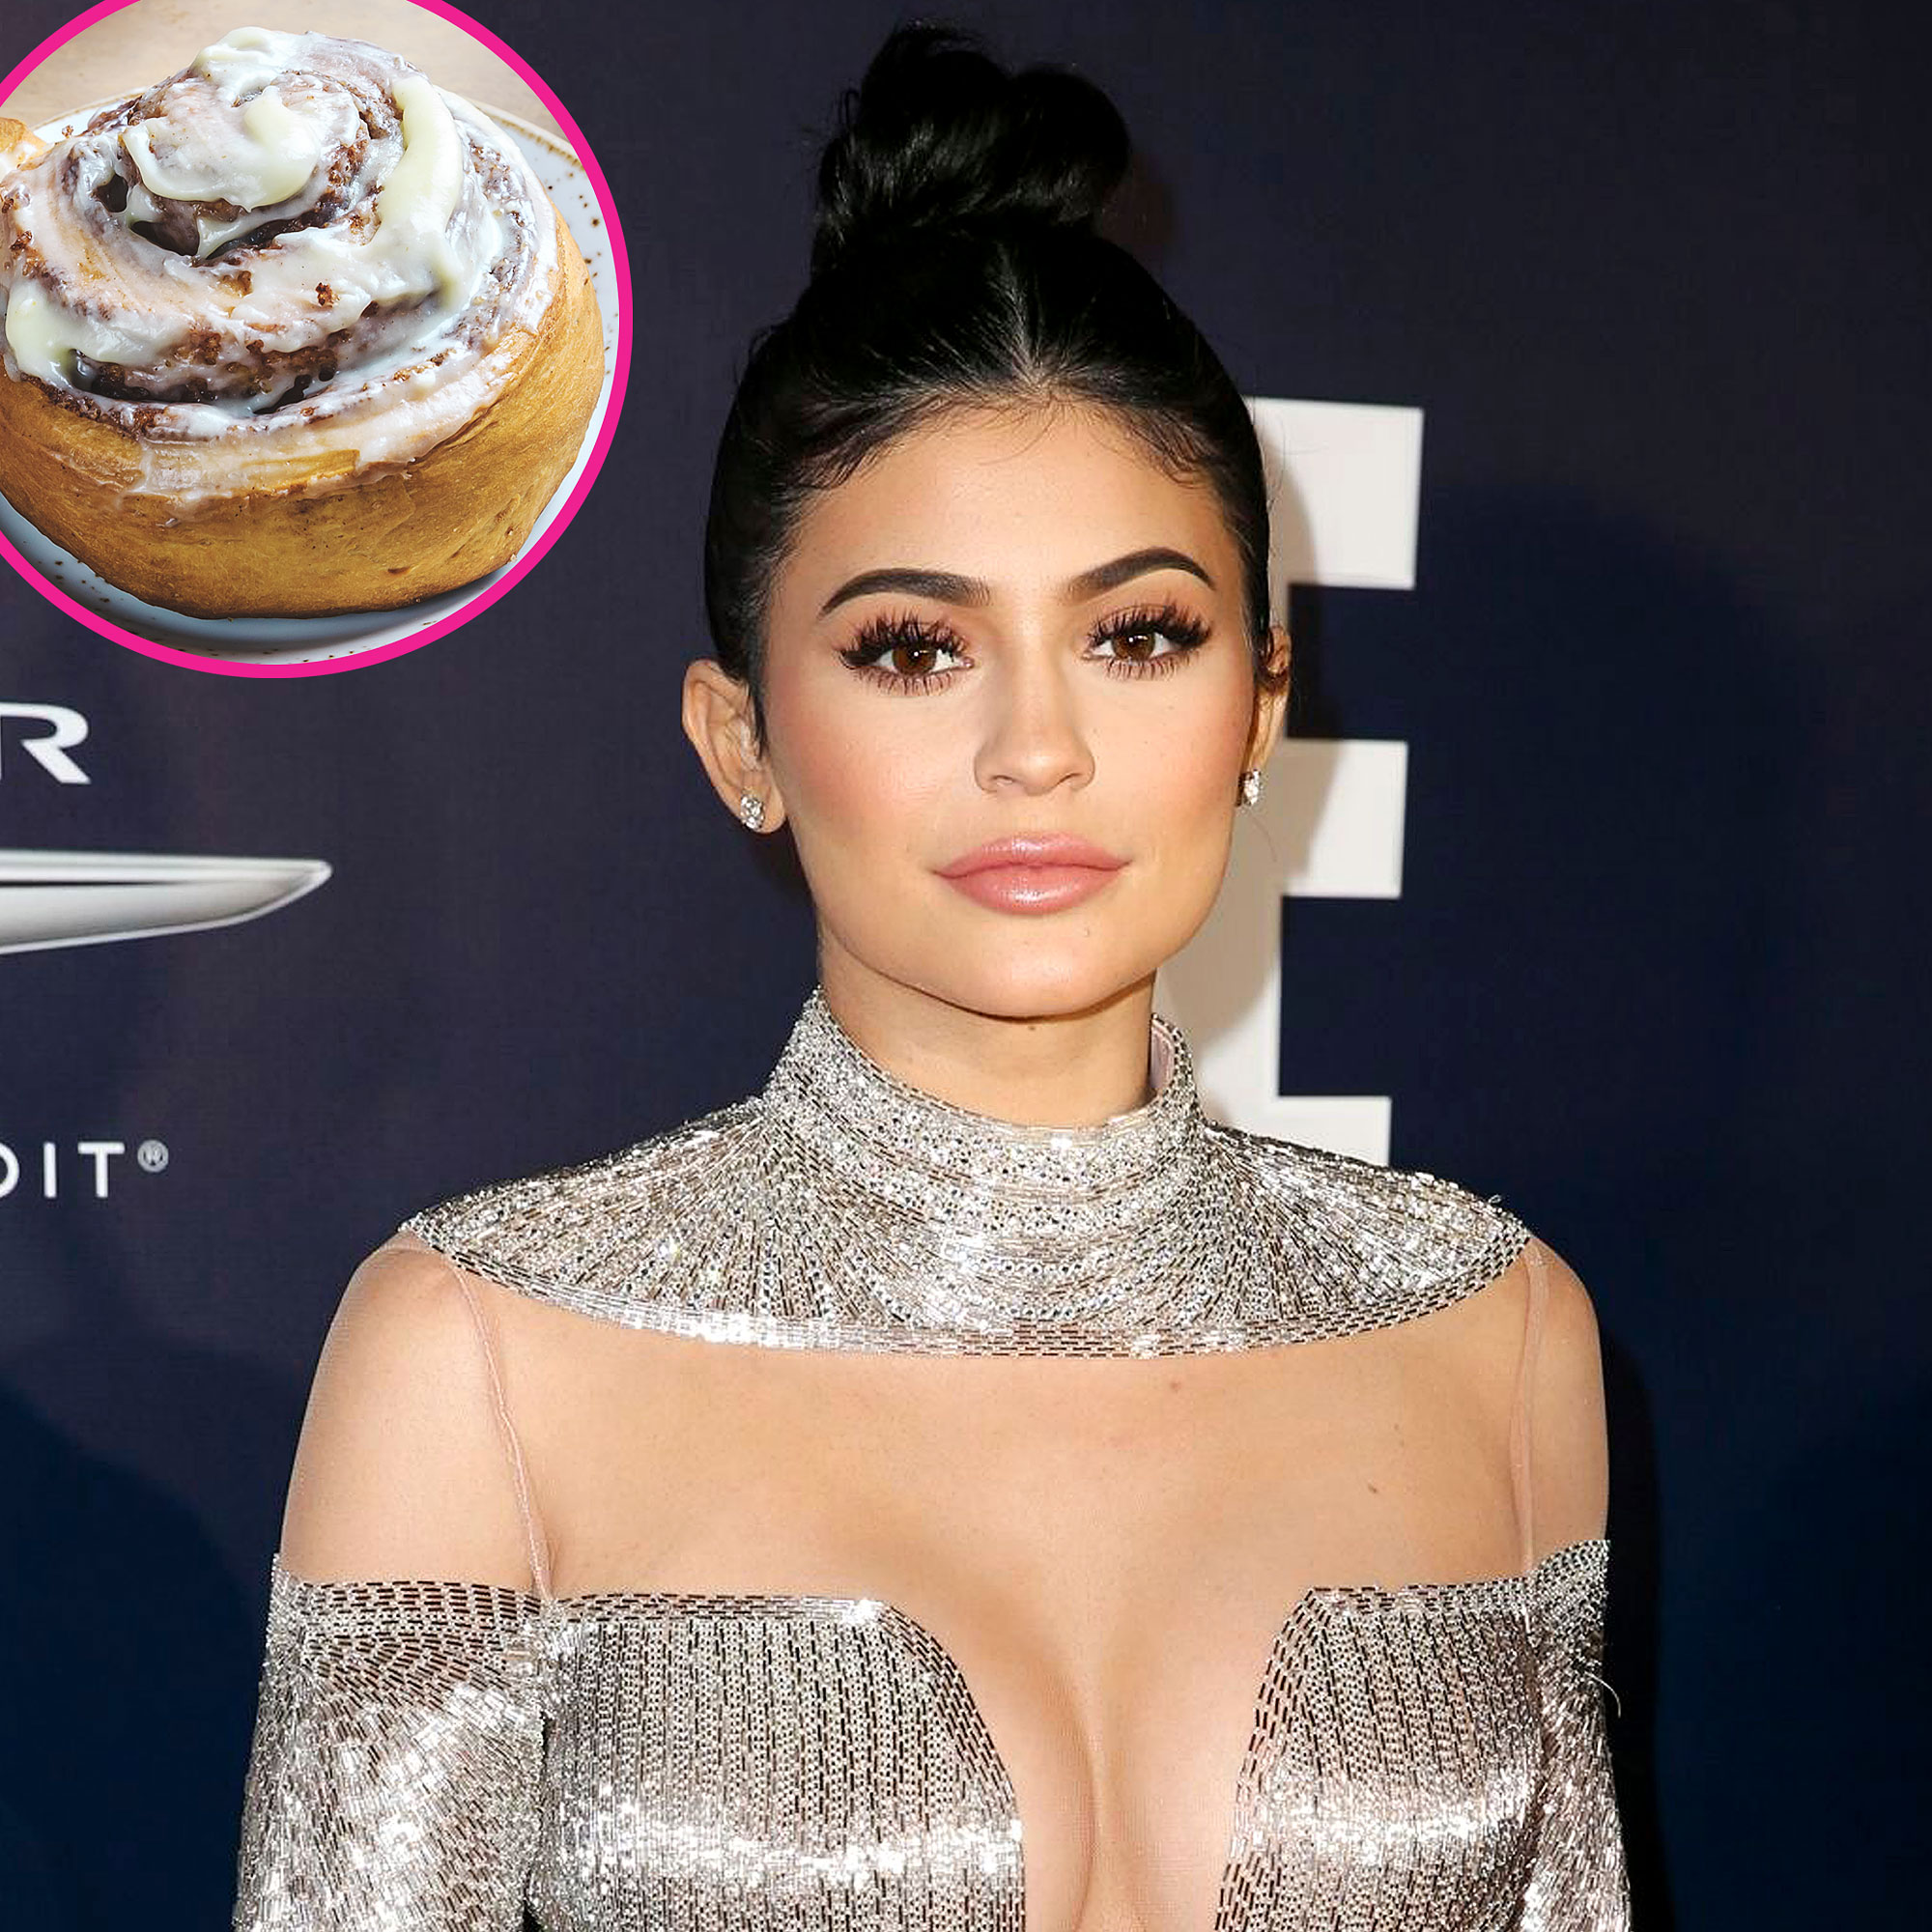 Kylie Jenner's Most Epic Birthday Gifts: Cars, Jewelry and Trips